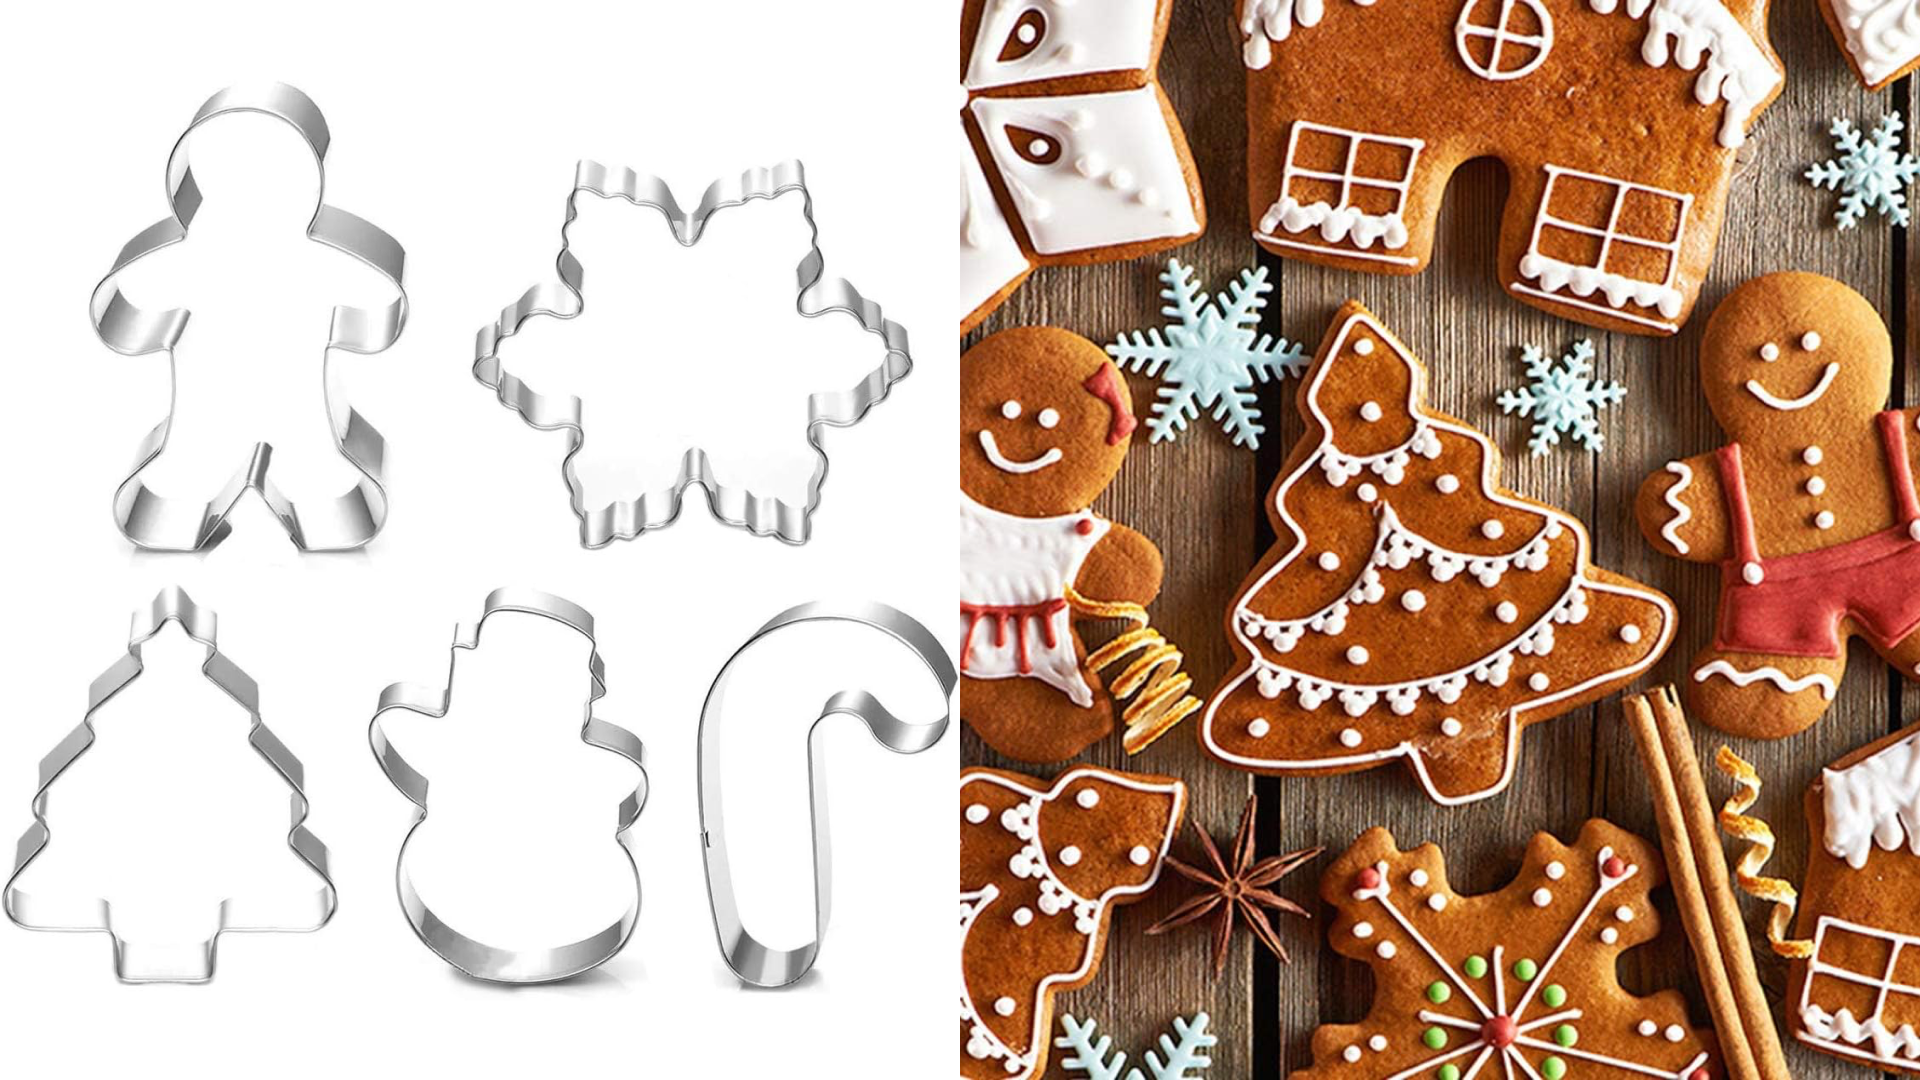 These Holiday-Themed Mini Waffle Makers Are Shaped Like Christmas Trees, Gingerbread  Men, and Snowflakes